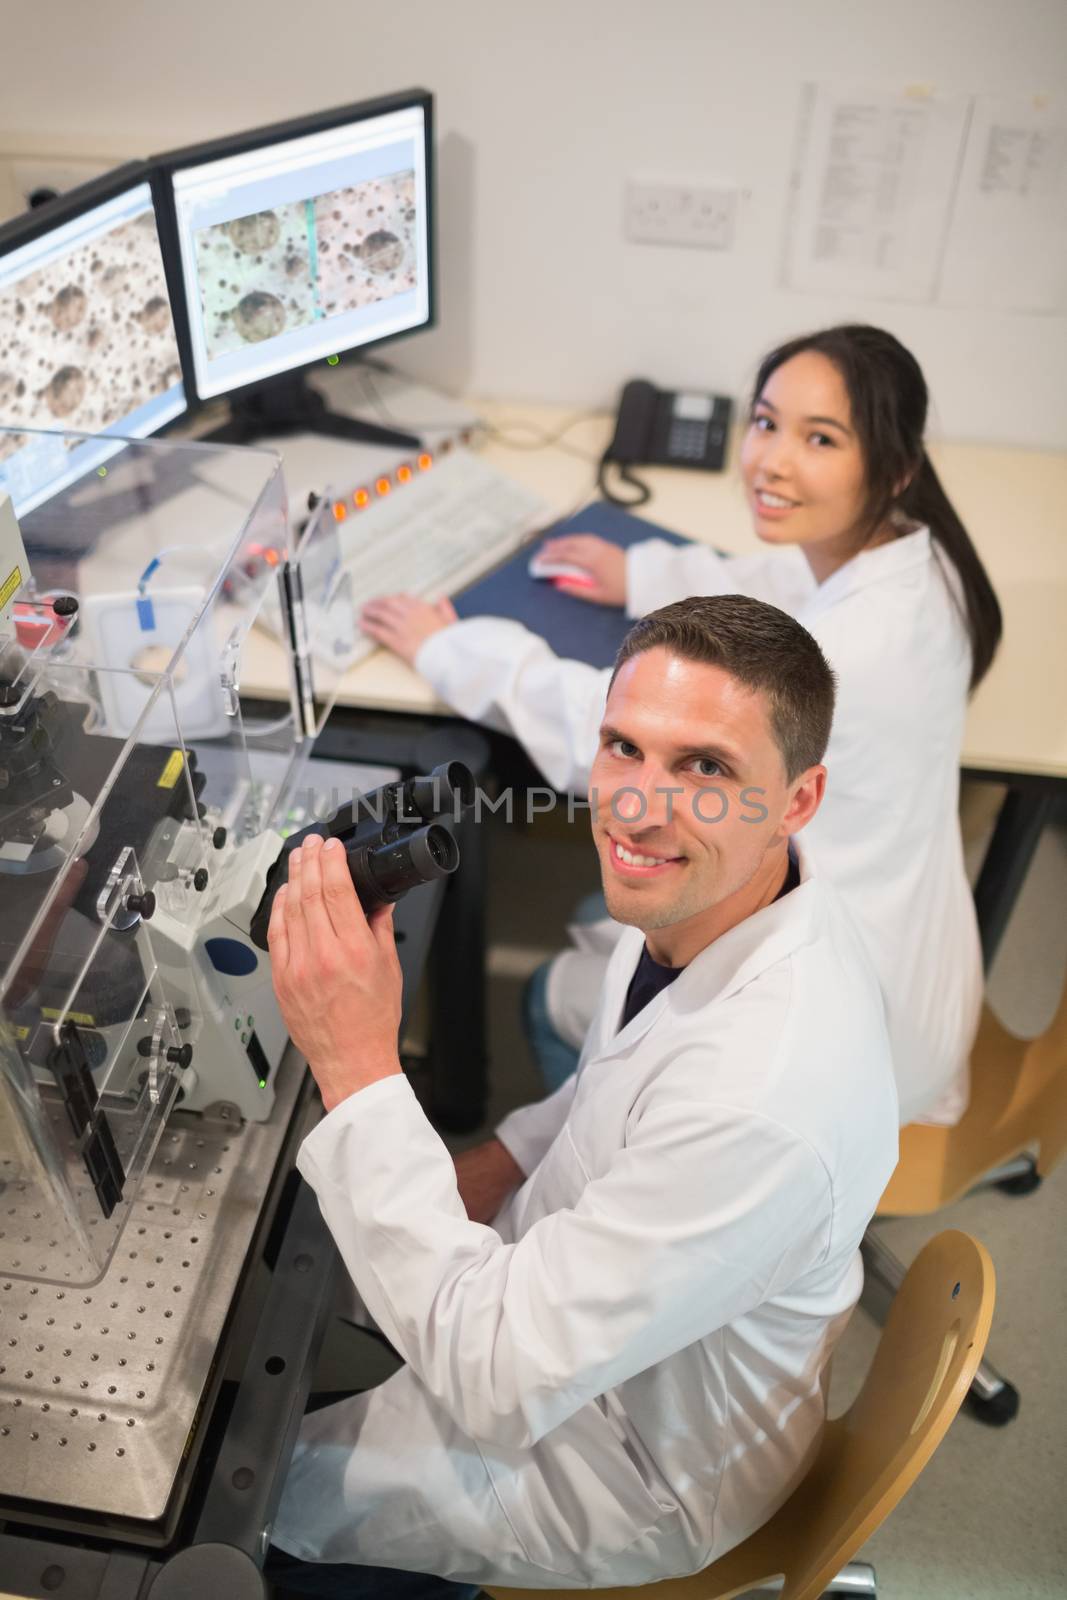 Biochemistry students using large microscope and computer by Wavebreakmedia